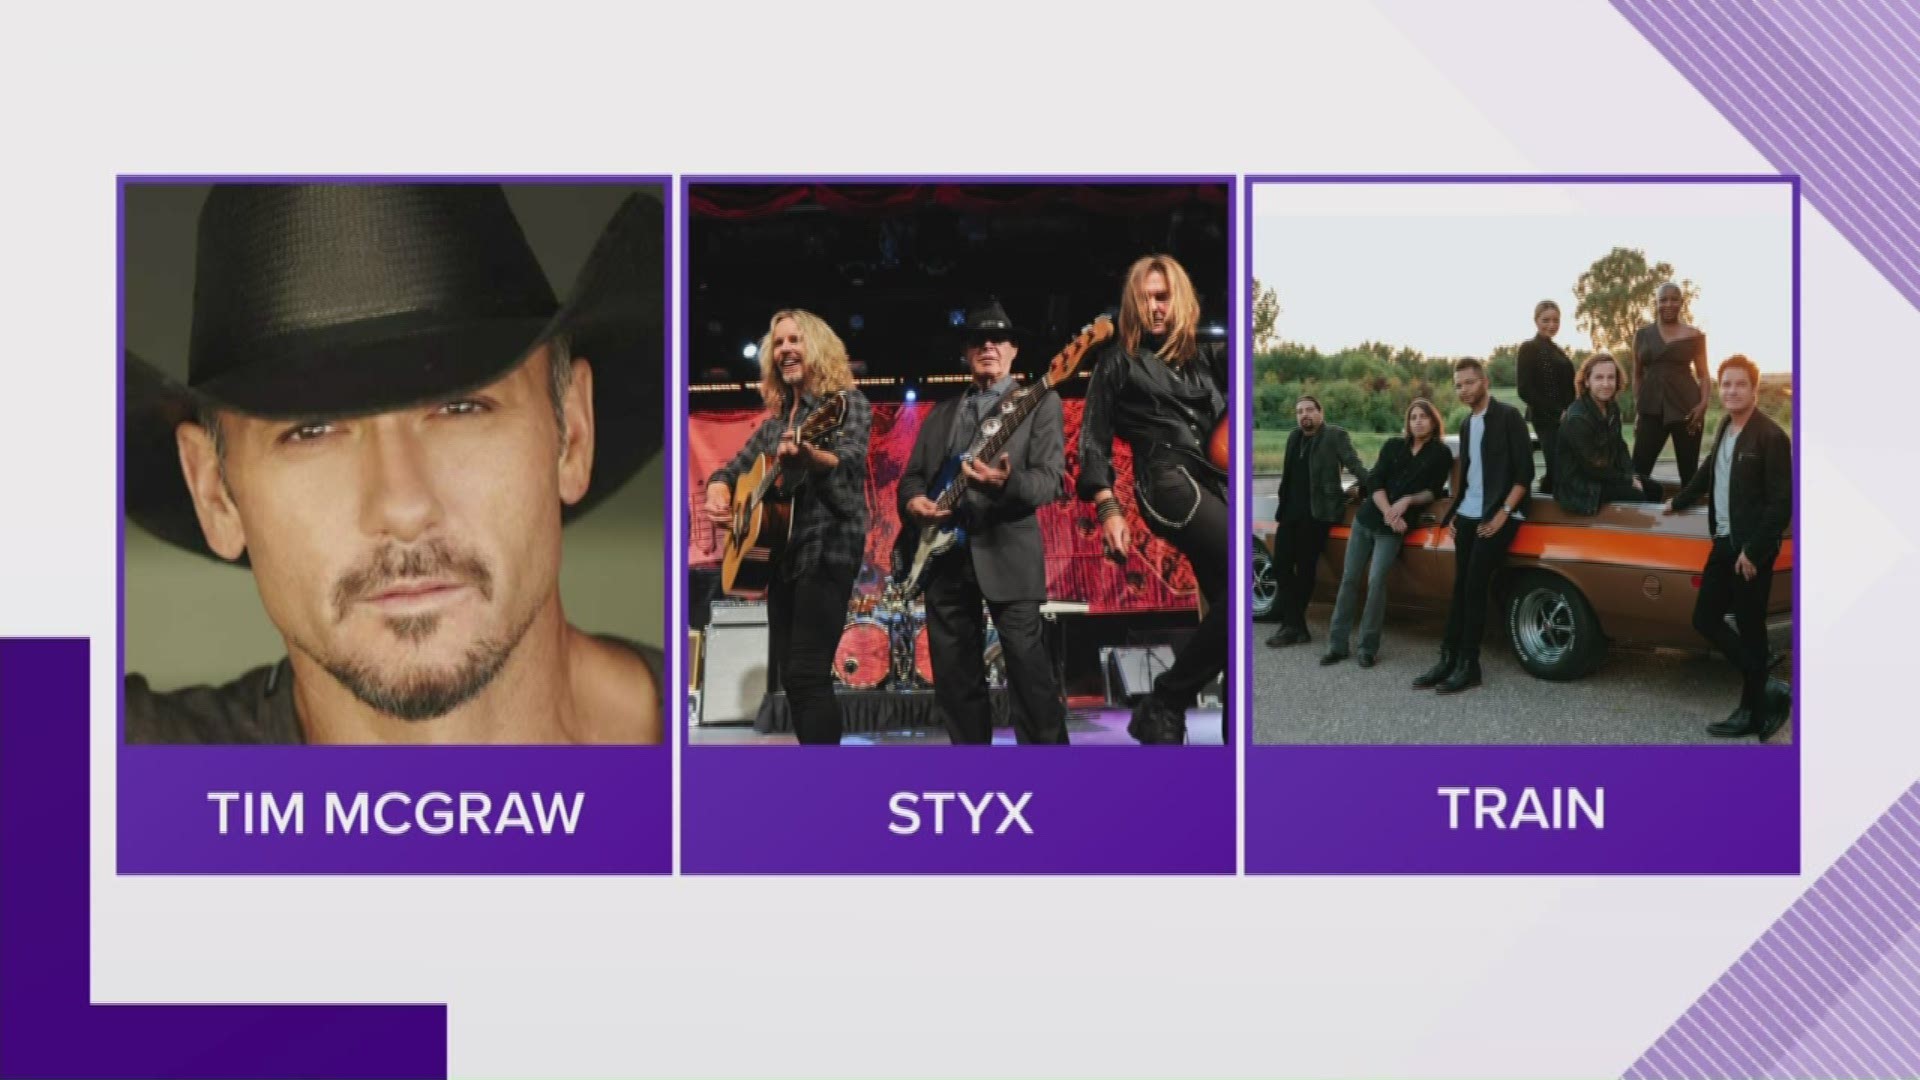 The Krewe of Endymion on Tuesday announced country music superstar and Louisiana native Tim McGraw as headliner of its 2020 parade and Extravaganza.